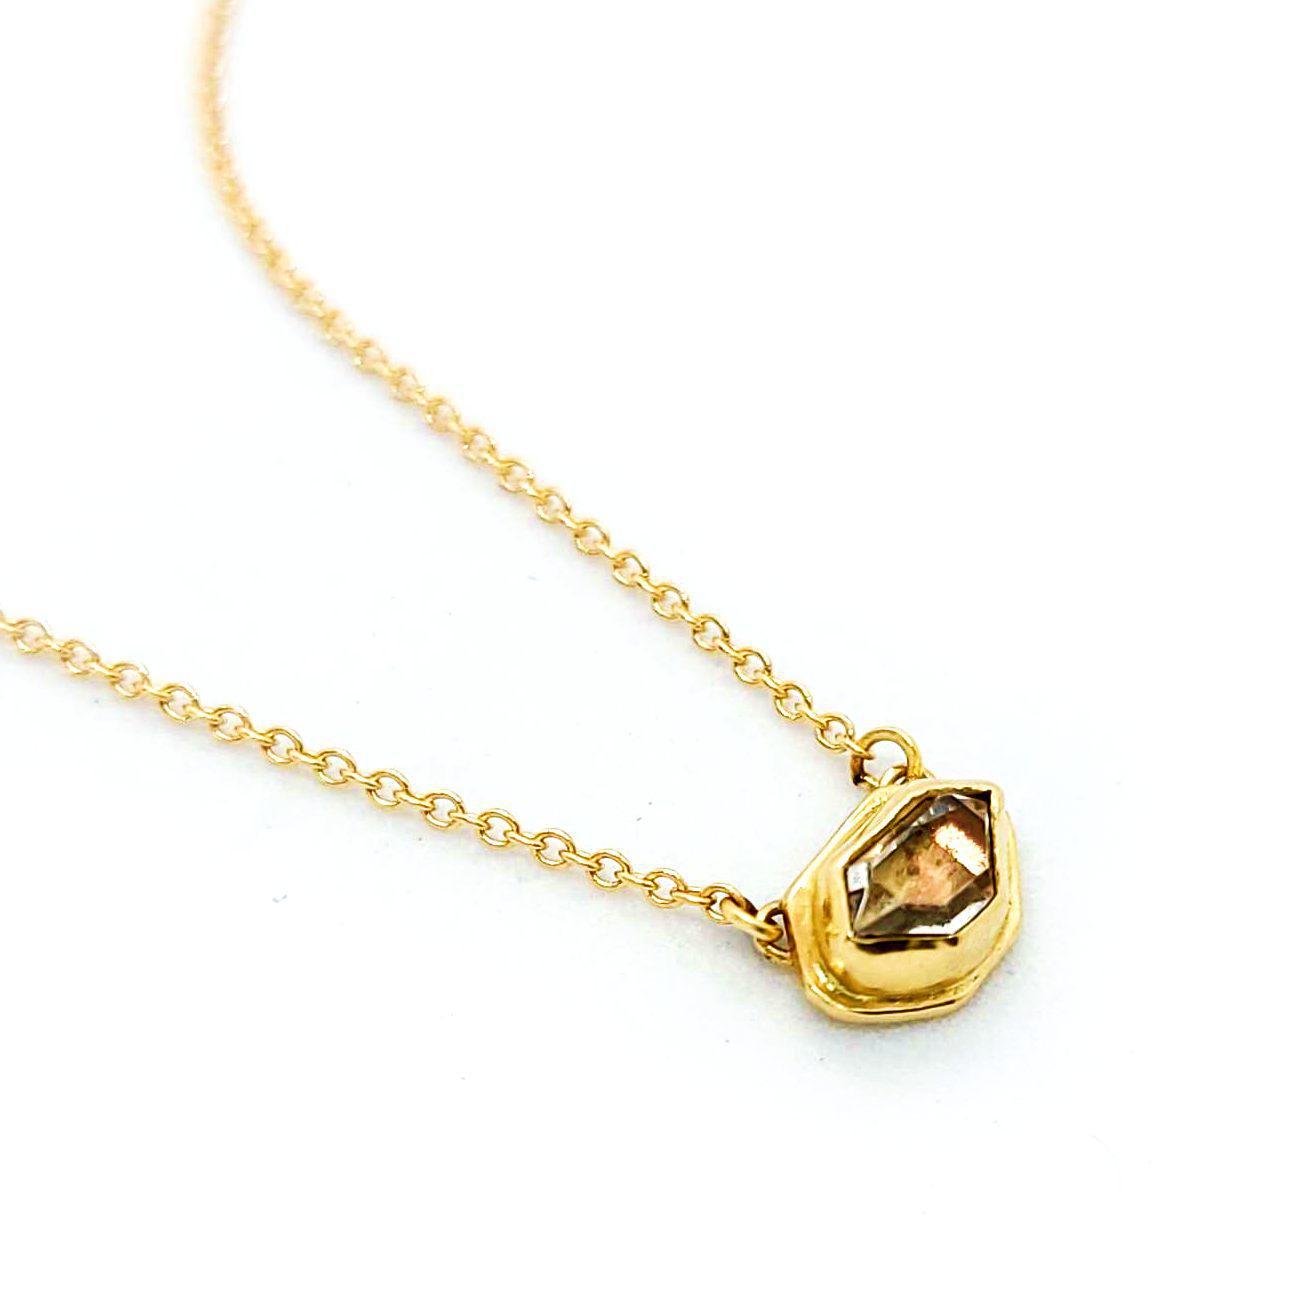 Necklace - East-West Glacier Mini Herkimer in 14k Yellow Gold by Stórica Studio